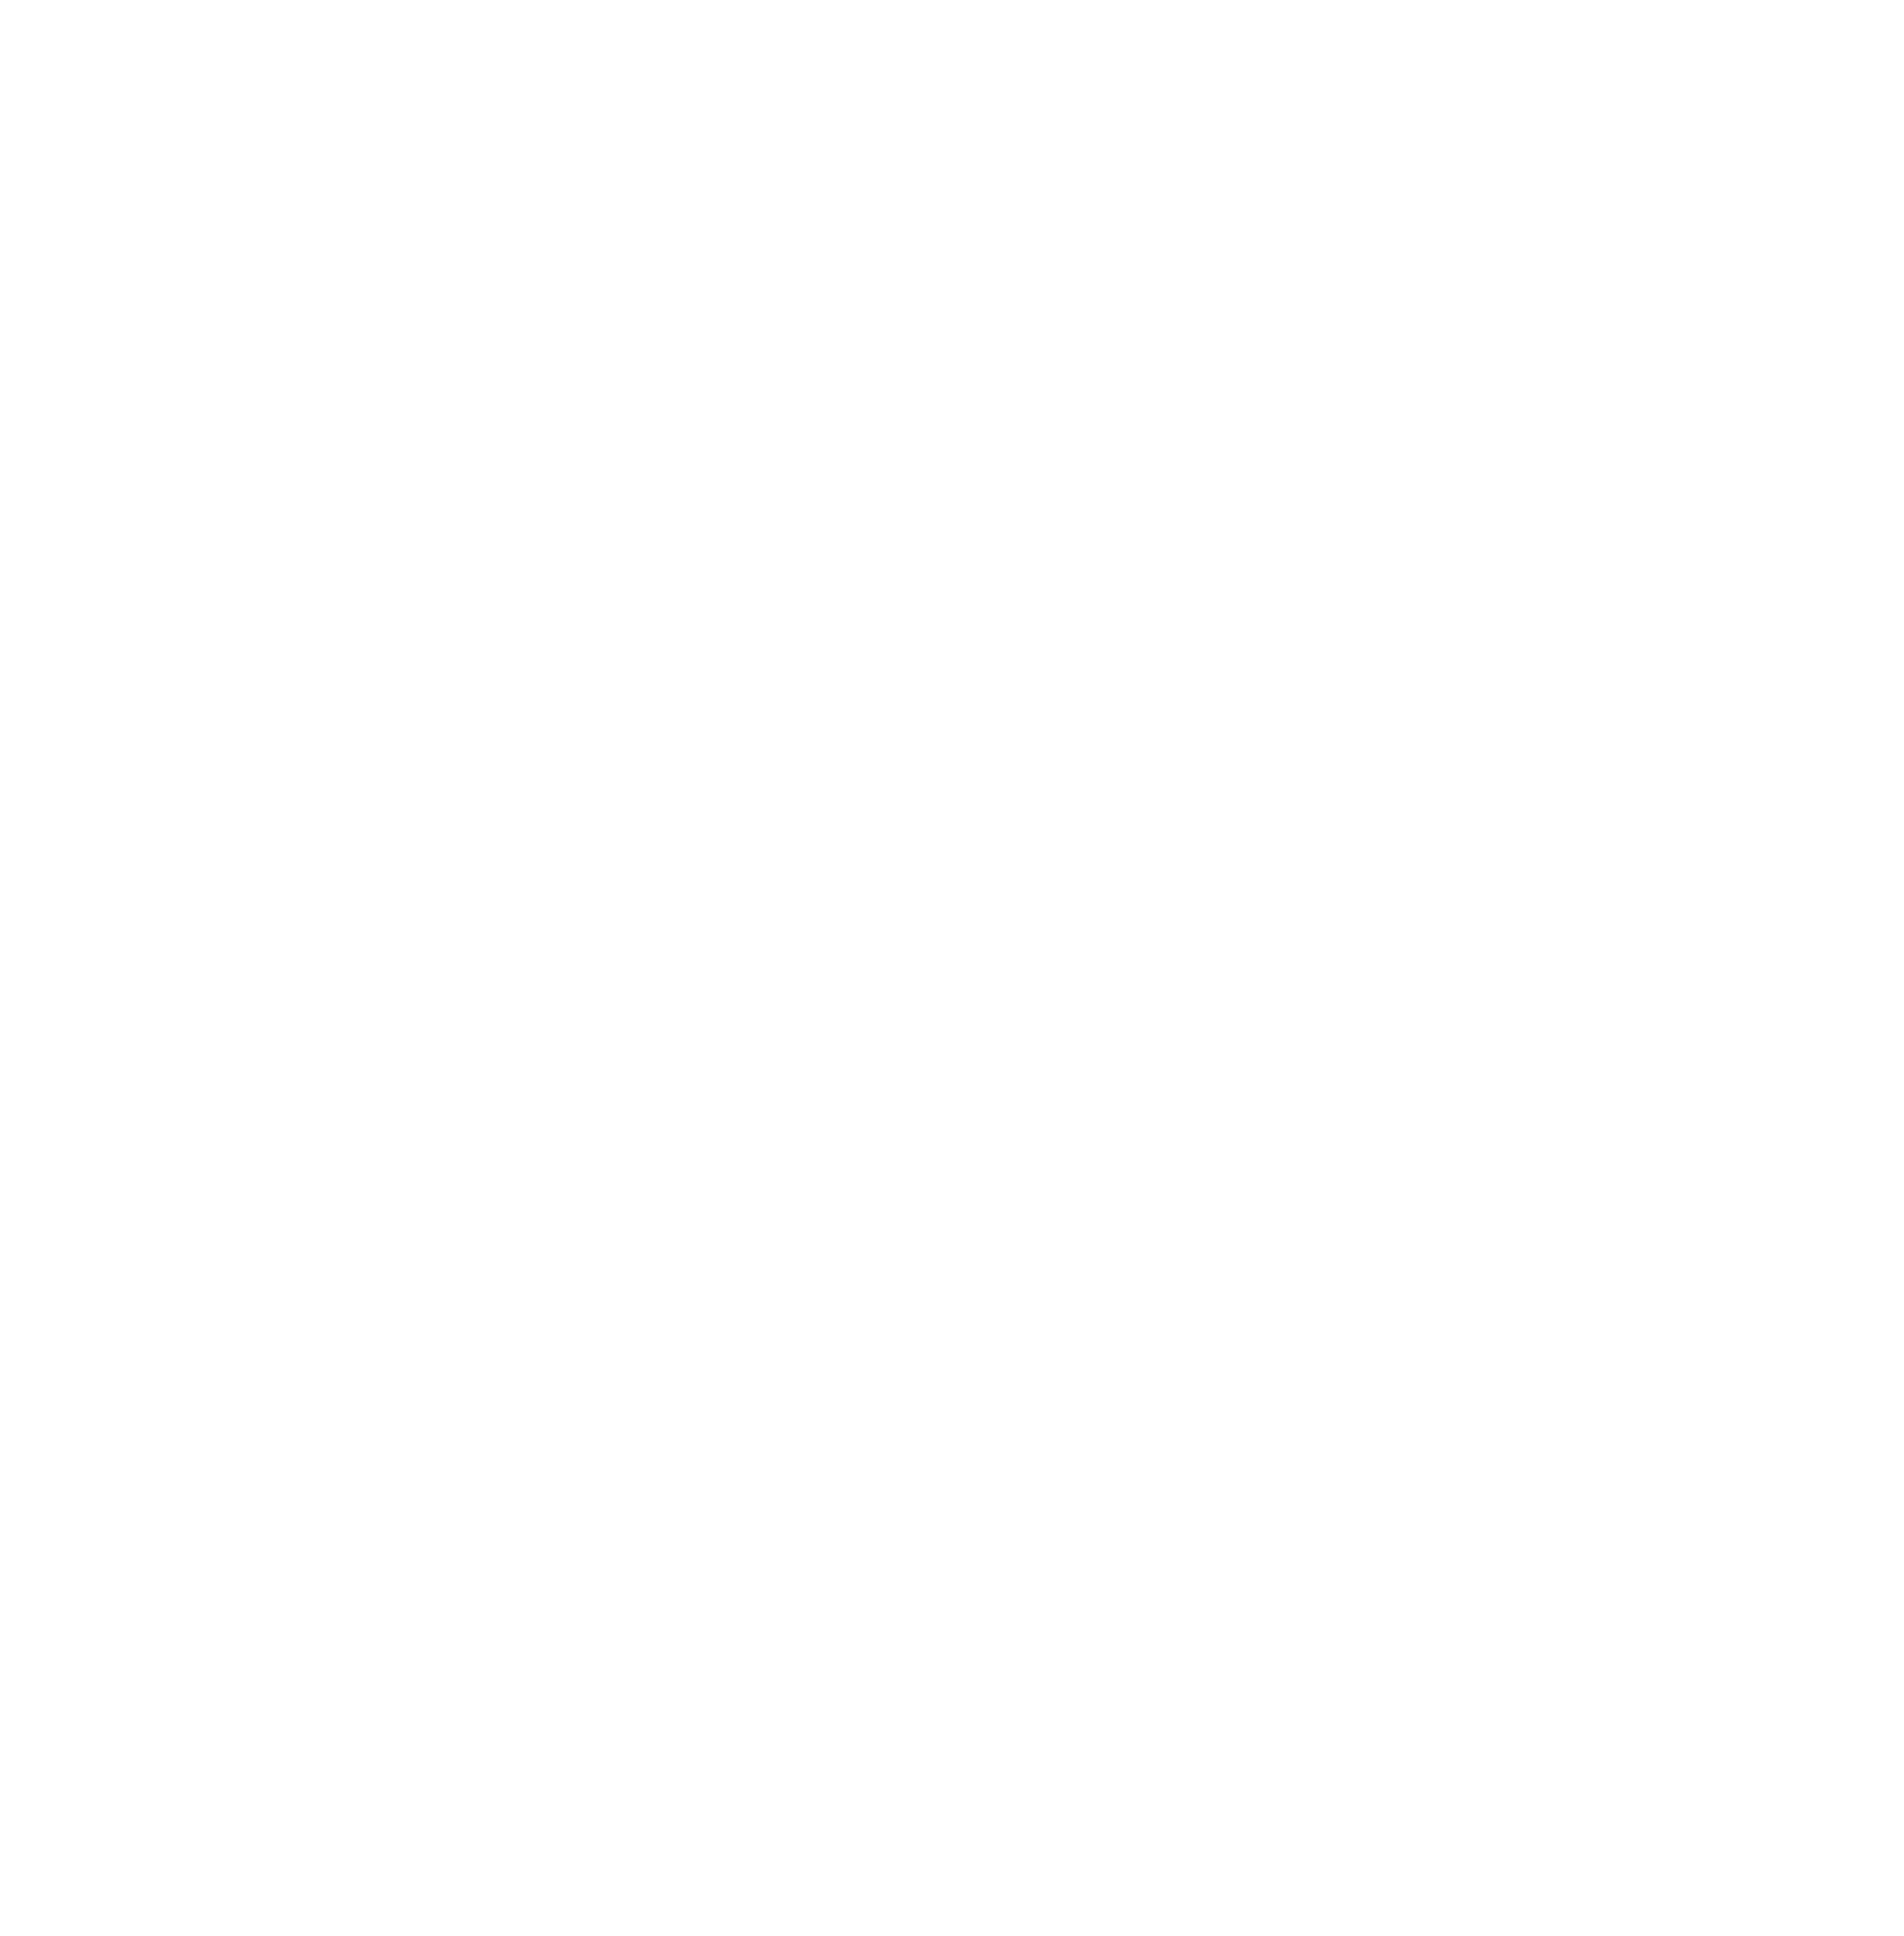 Glasgow Lindy Hoppers